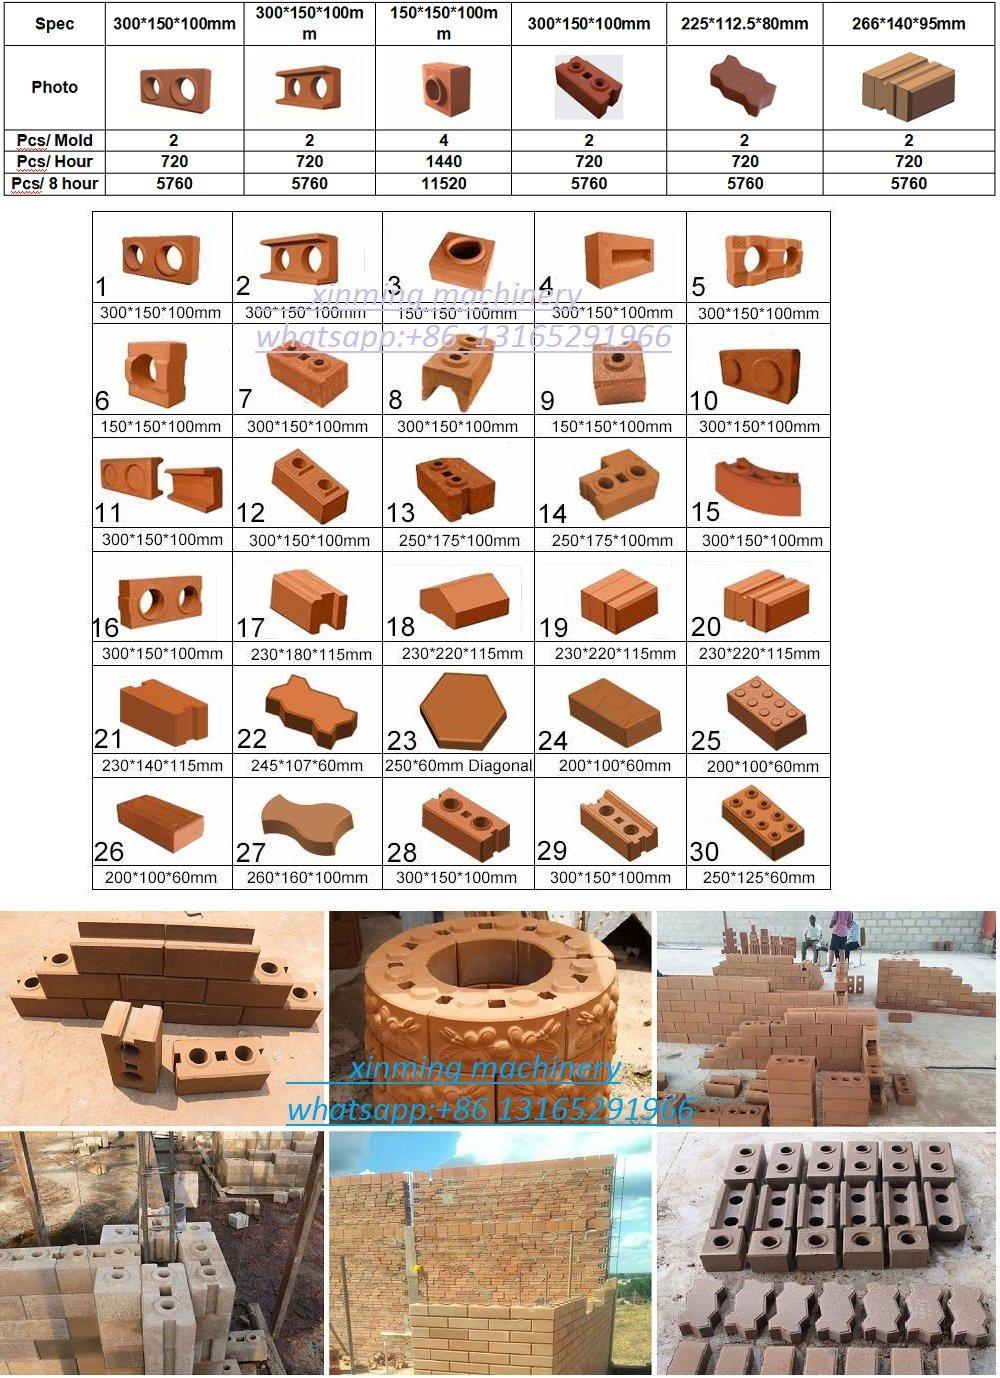 Xinming Moveable M7m2 Clay Soil Interlocking Clay Brick Machine with Factory Price